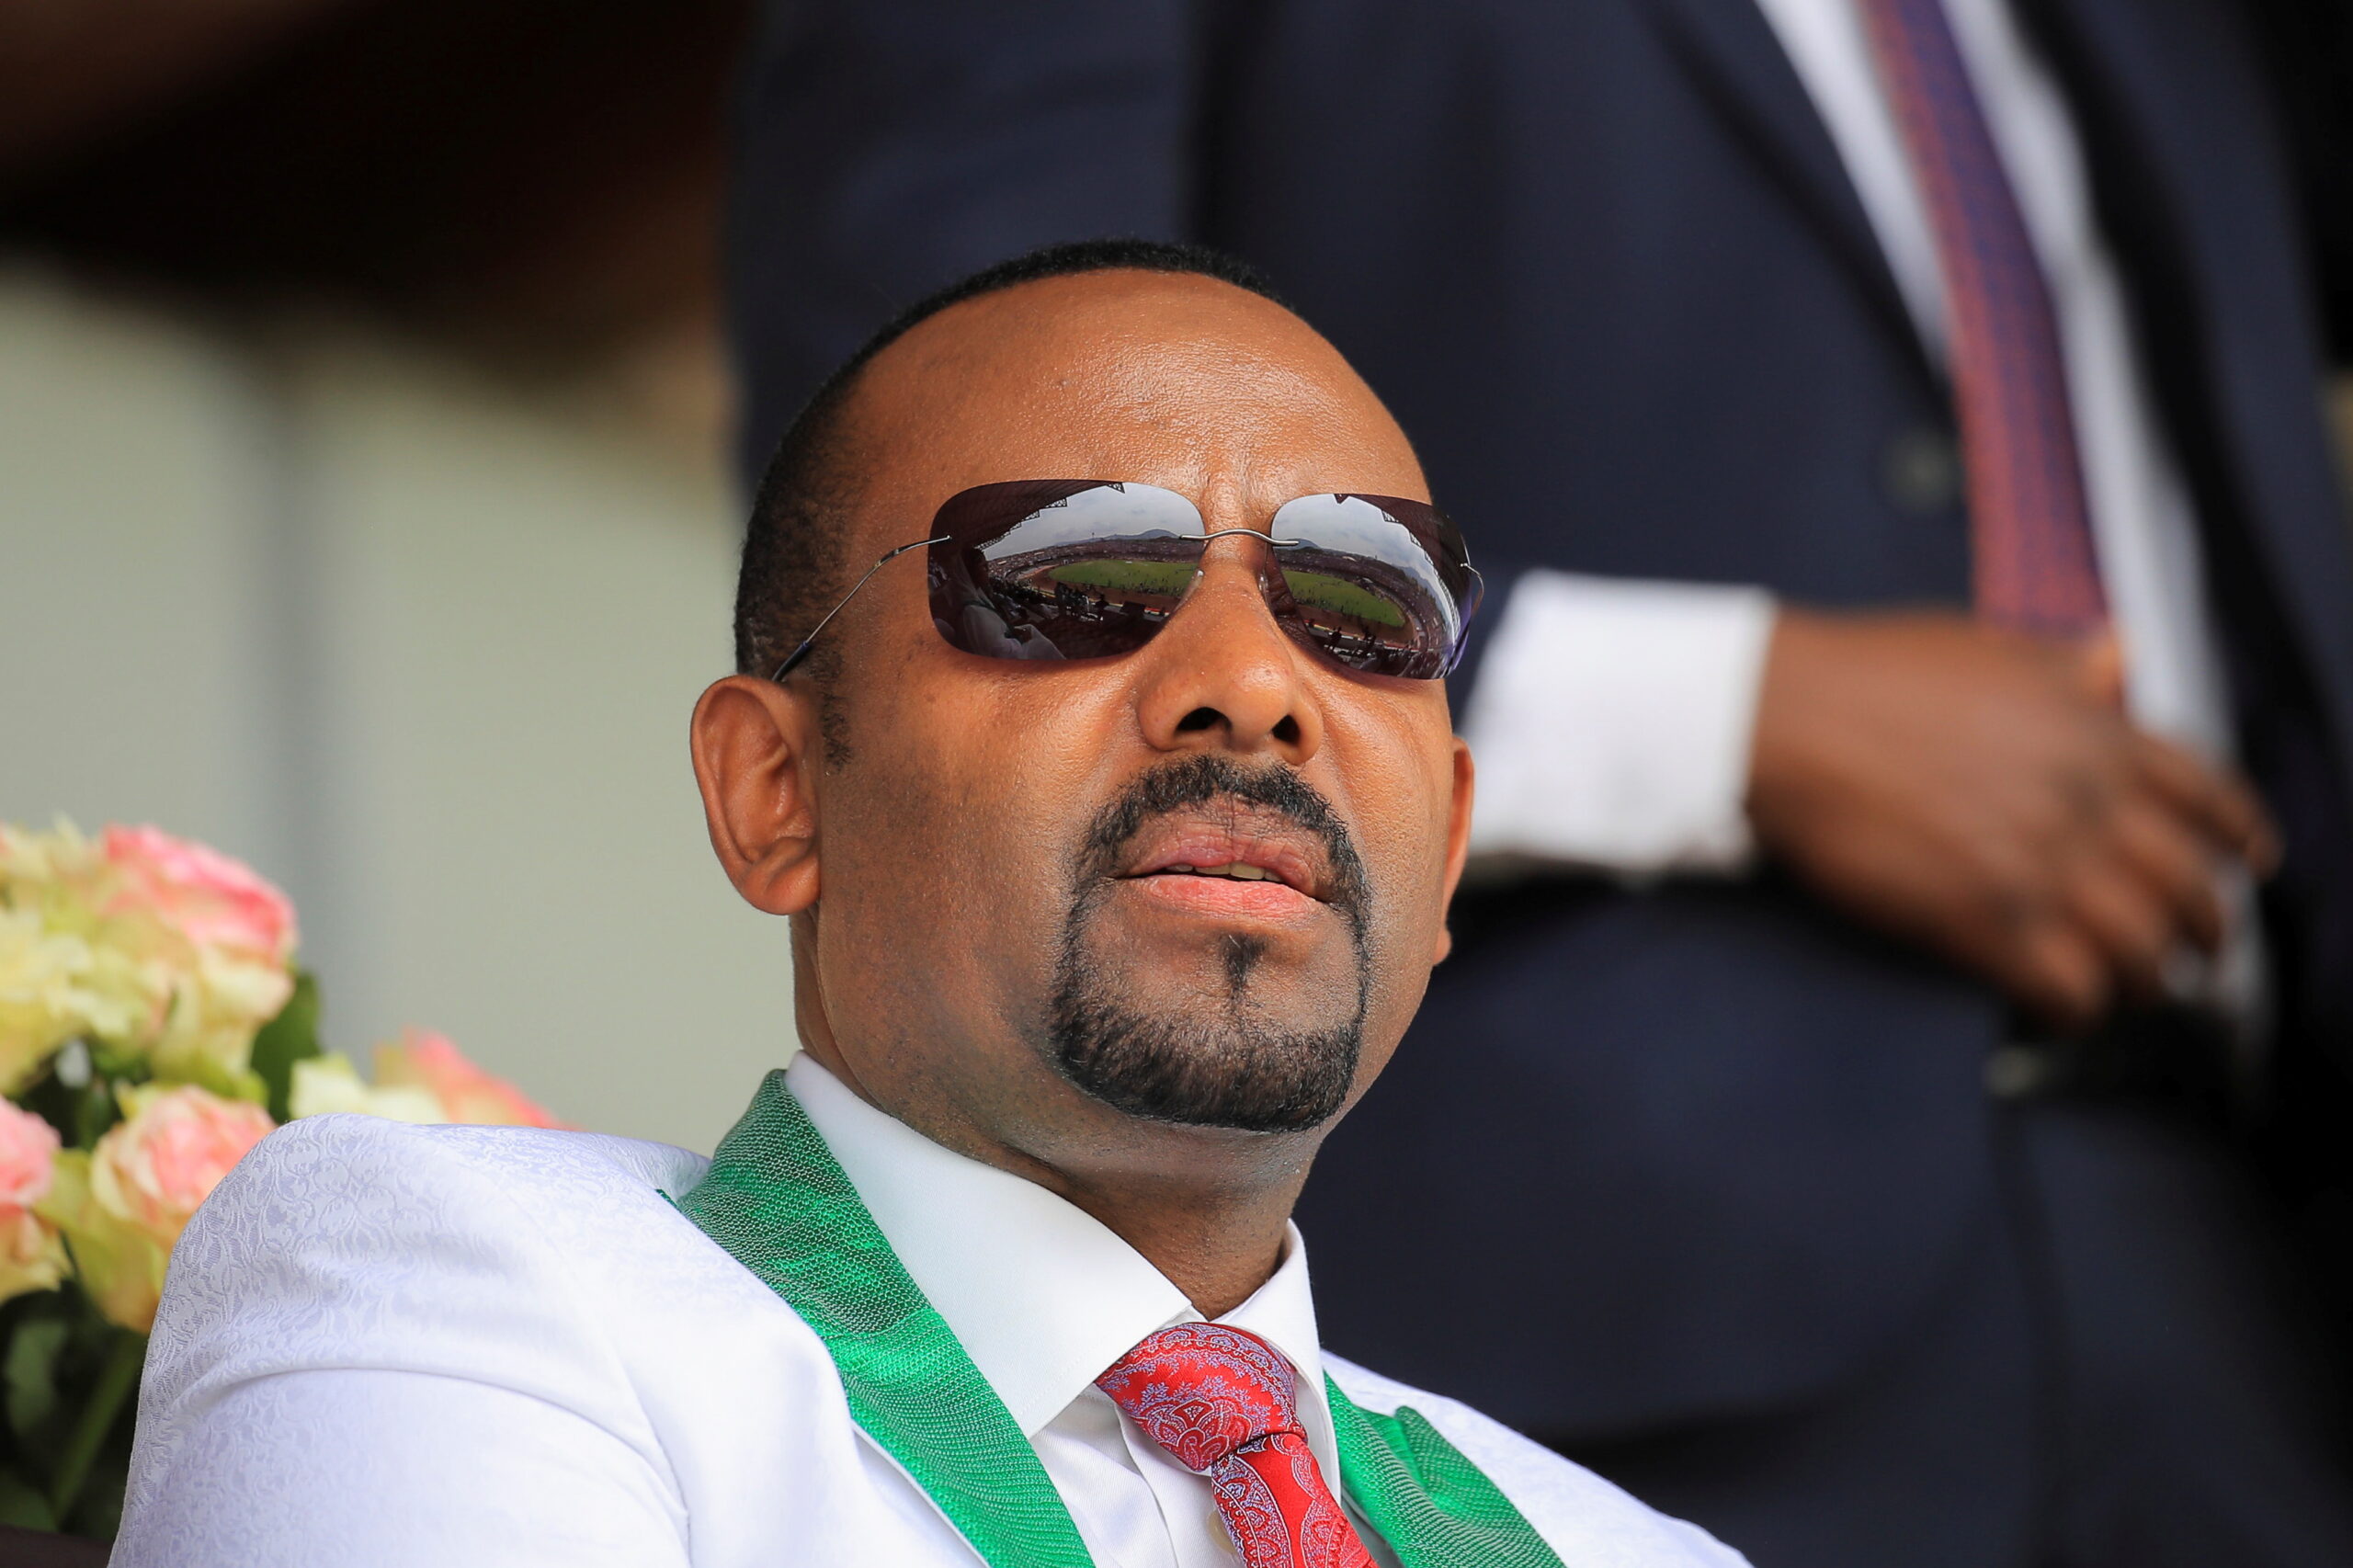 2021 06 16T114459Z 1221853903 RC2M1O9H6IFT RTRMADP 3 ETHIOPIA ELECTION ABIY scaled